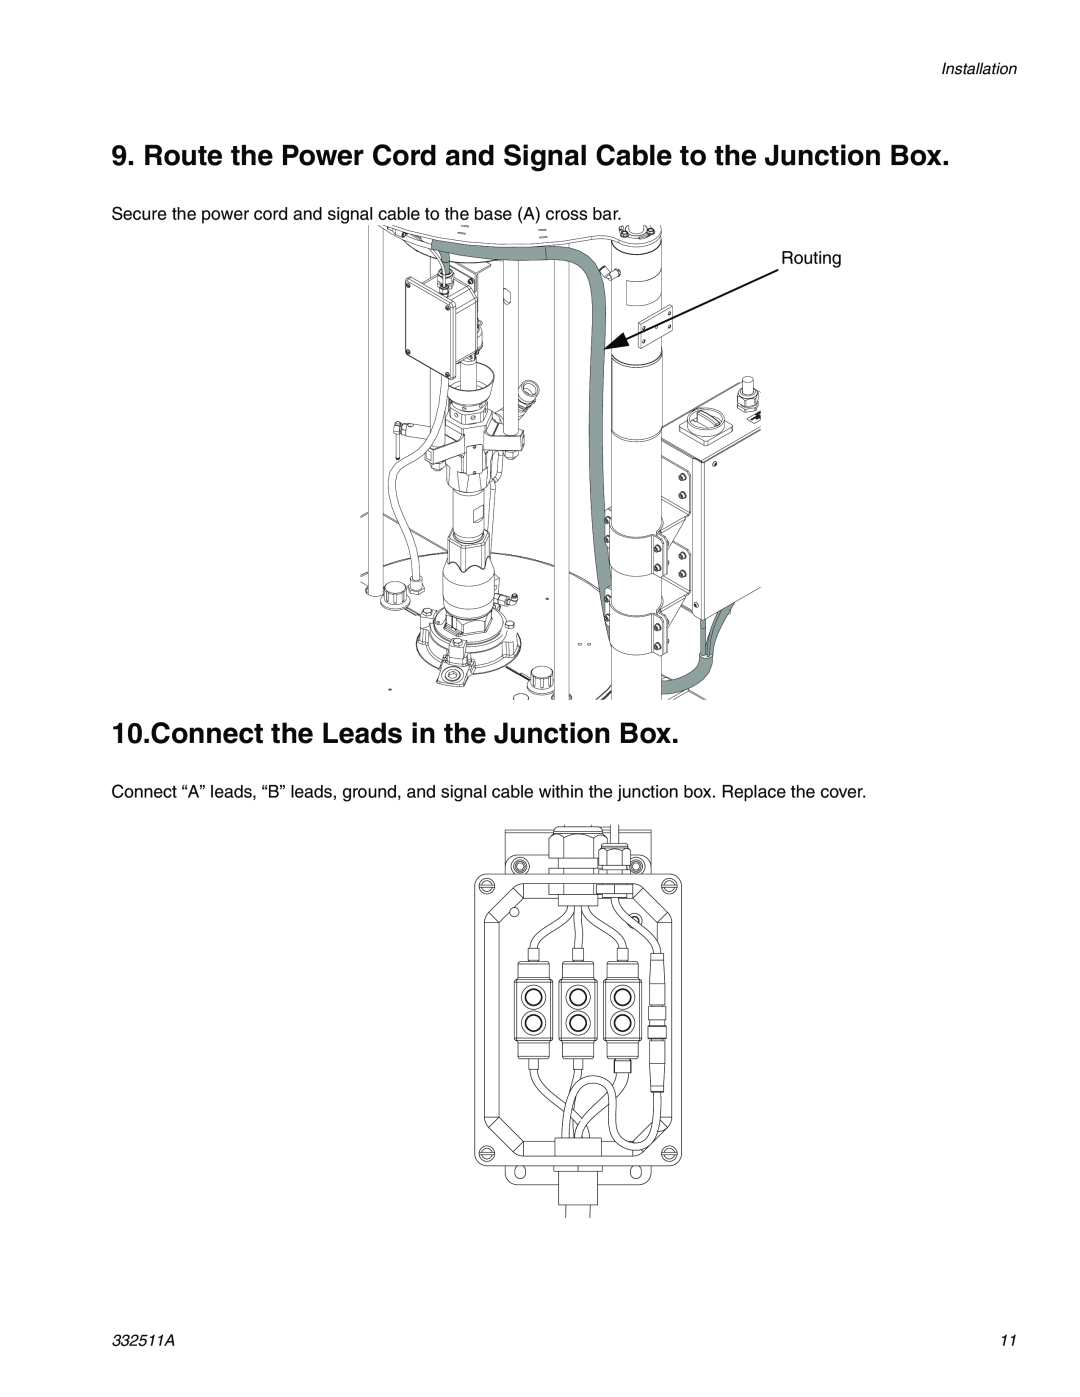 Graco 24R200 operation manual Connect the Leads in the Junction Box 